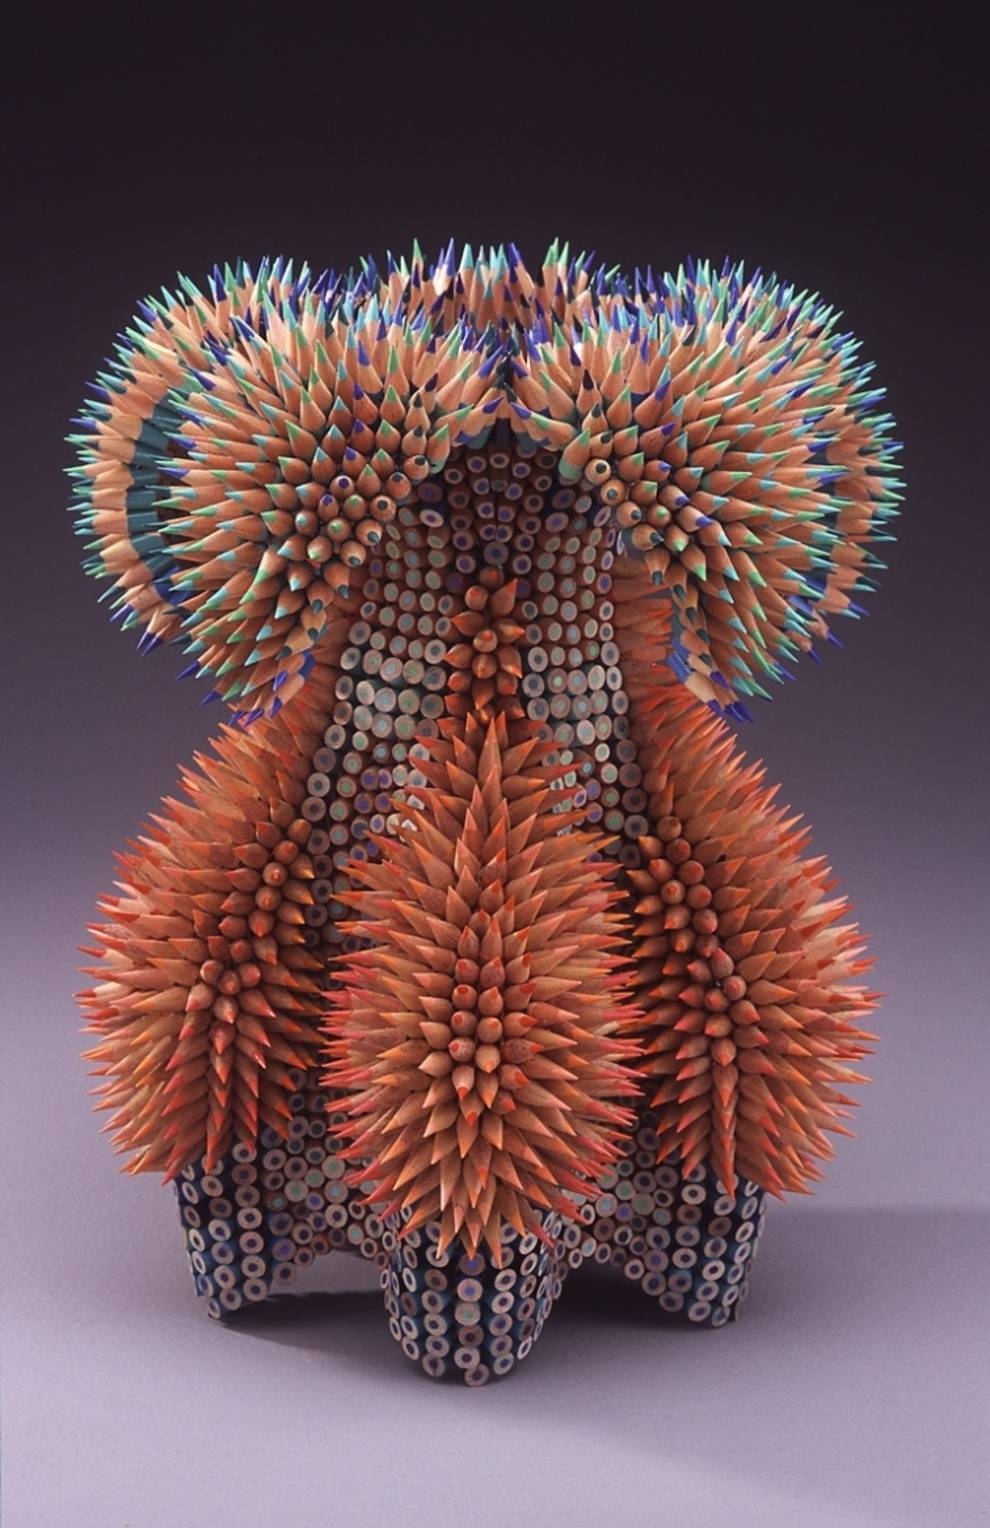 How colored pencils turn into sculptures